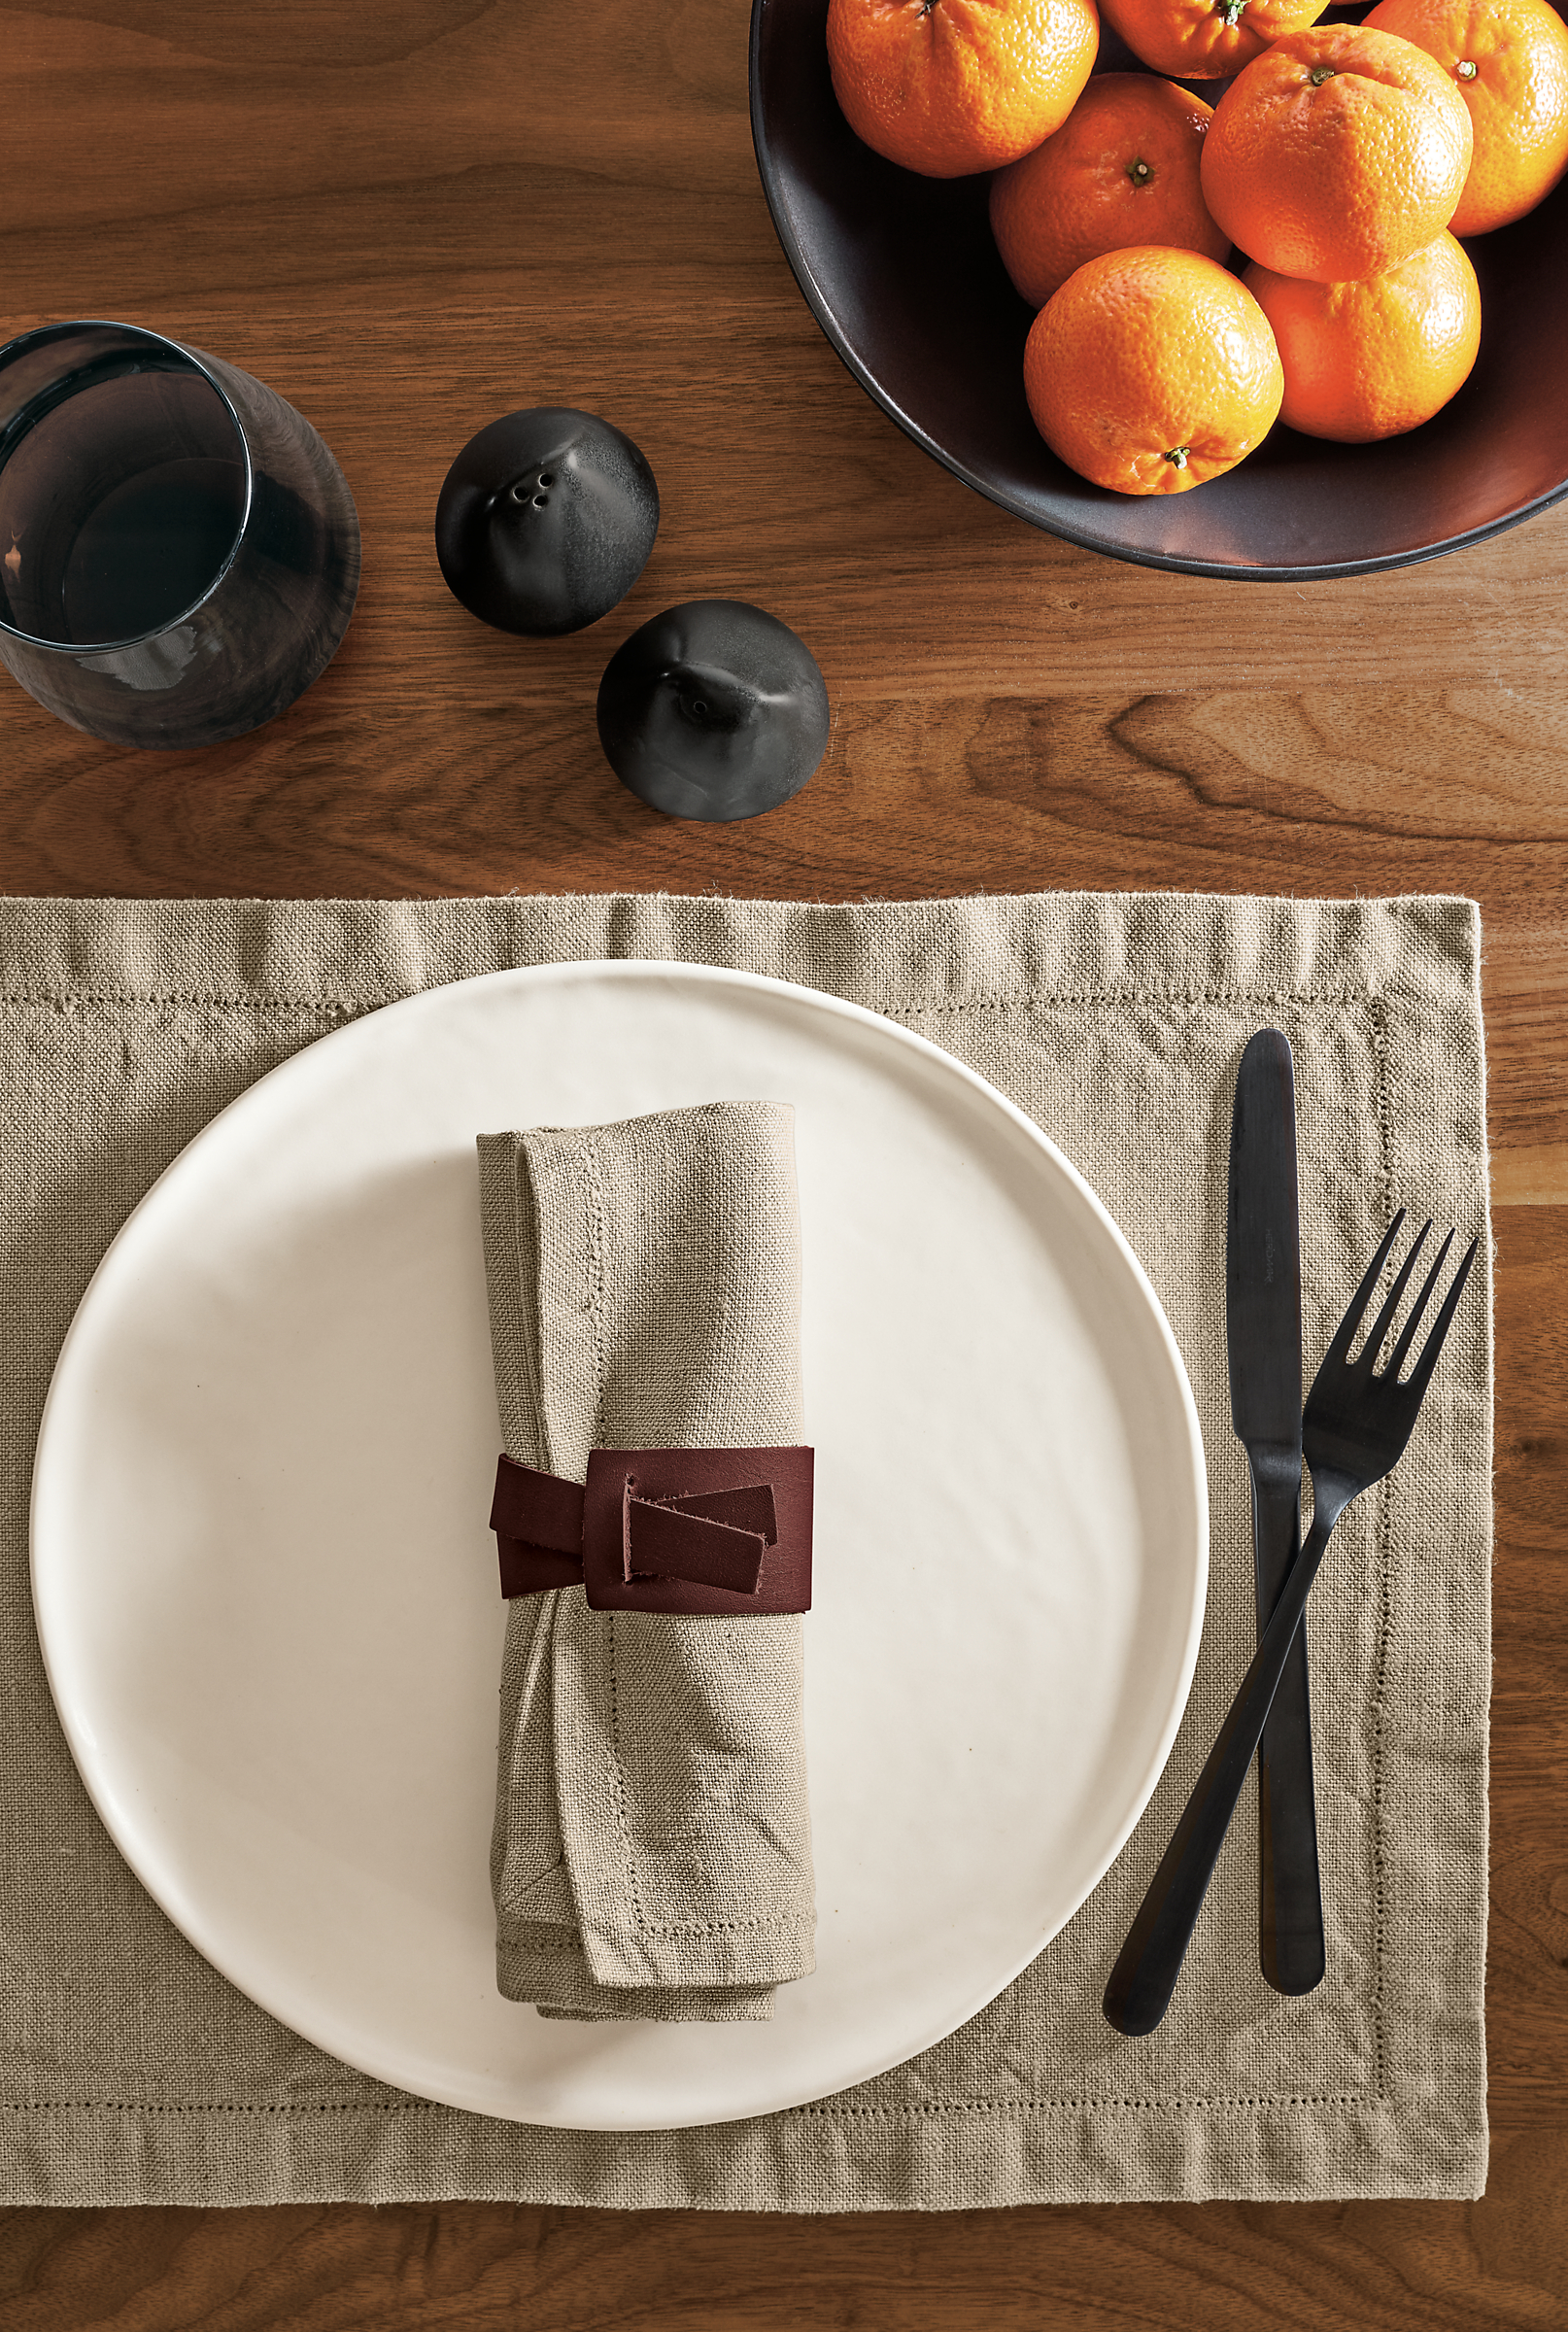 Detail of Verza leather napkin ring in place setting.